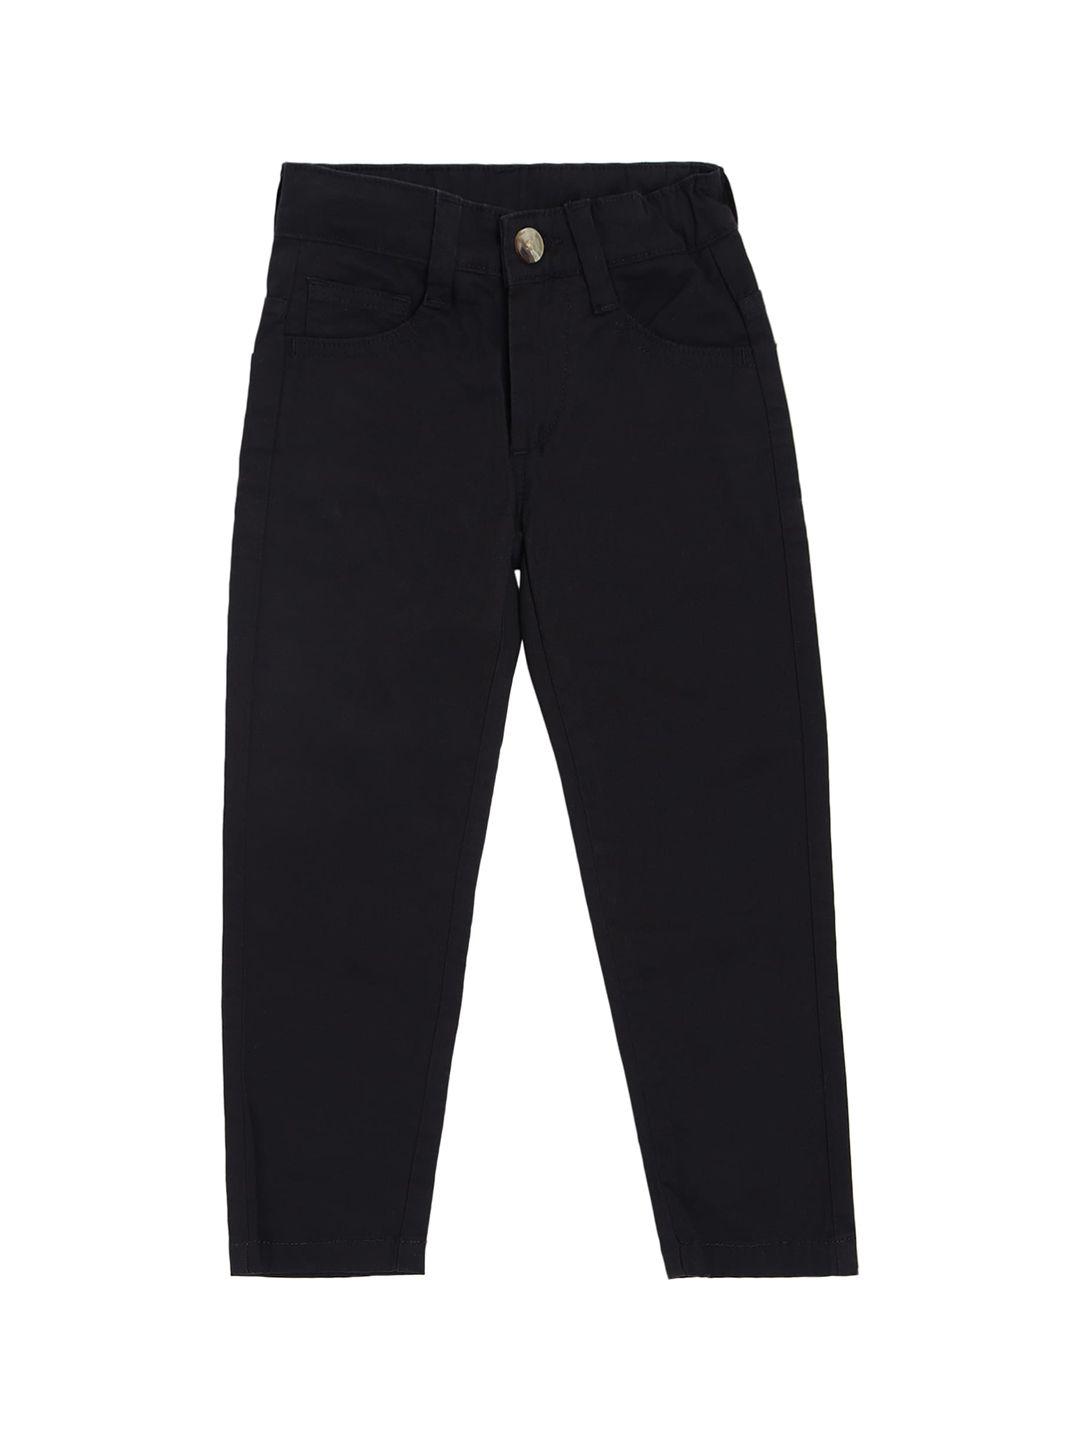 cantabil-boys-cotton-chinos-trousers